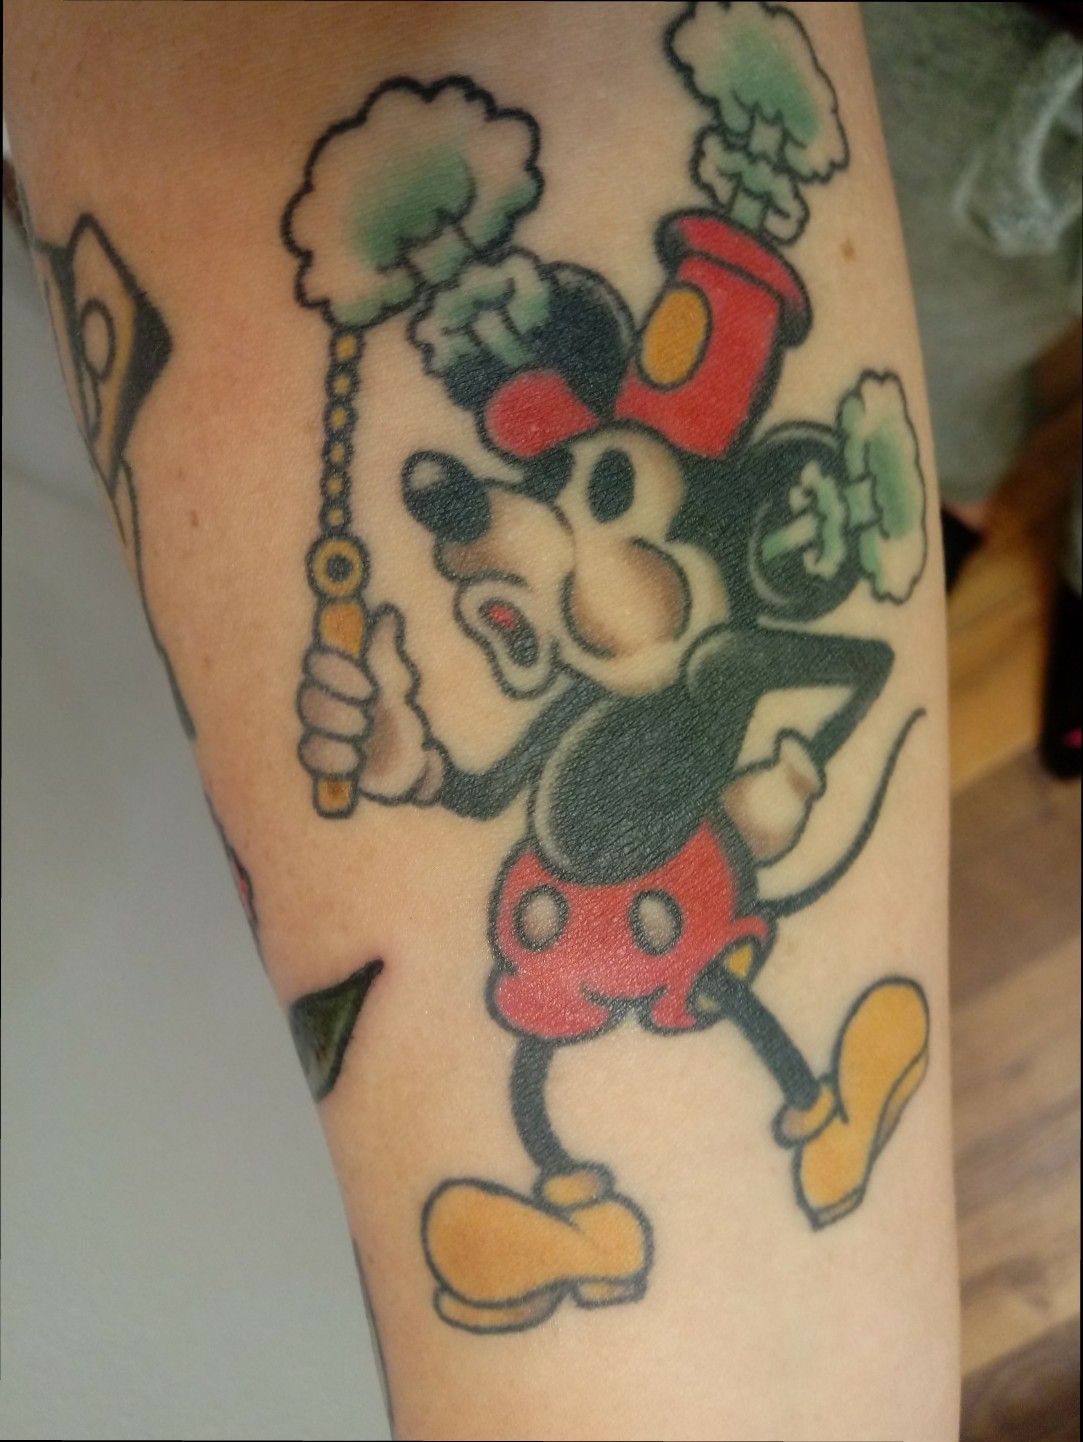 My first big tattoo Steamboat Willie Mickey Mouse  by Deano  Katwalk  Ink Birmingham UK  rtattoos